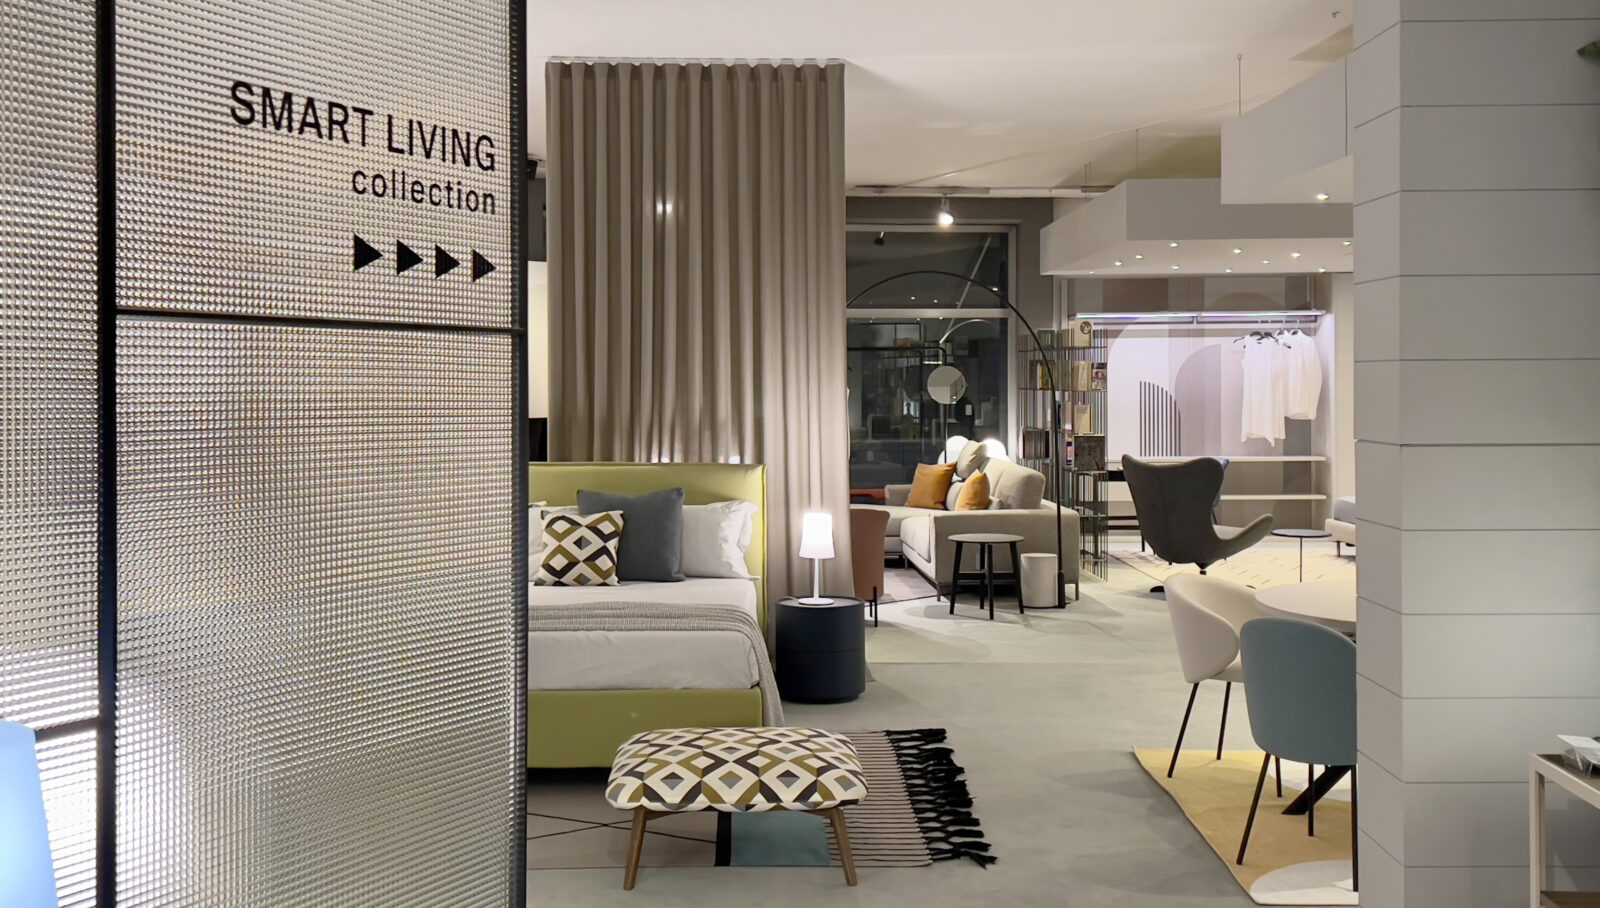 SMART LIVING: come to discover our new collection